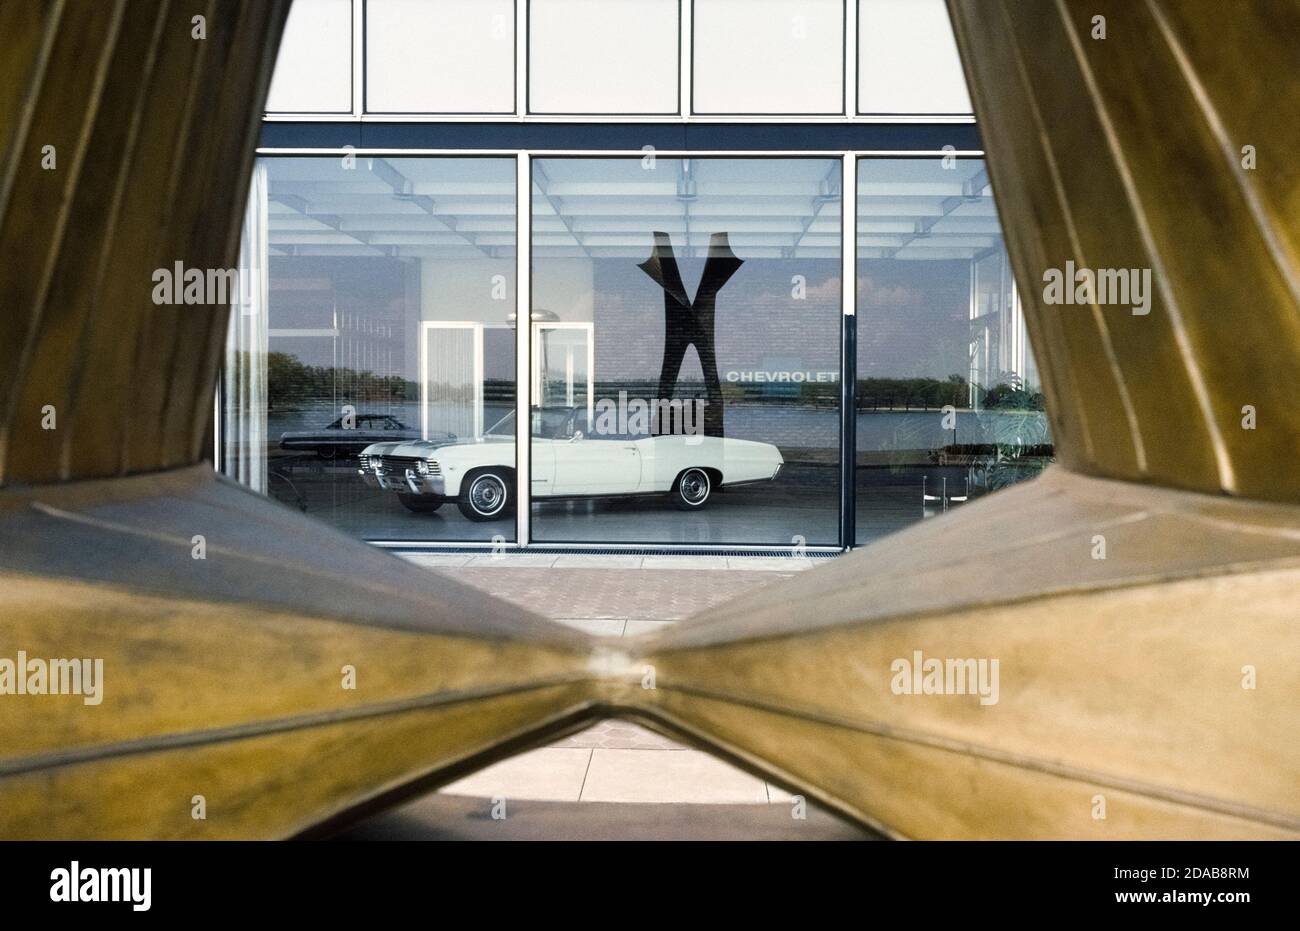 A 1967 Chevrolet Impala convertible is framed through an outdoor sculpture reflected in a showroom display window at the General Motors Technical Center in the Detroit suburb of Warren, Michigan, USA. Designed by internationally-renowned father and son architects, Eliel and Eero Saarinen, the modernistic GM Tech Center represented industrial America when it opened in 1956 with 25 buildings spread over a 320-acres (130 hectares). The widely-praised complex ushered in a new and novel architectural theme: the corporate campus. Stock Photo